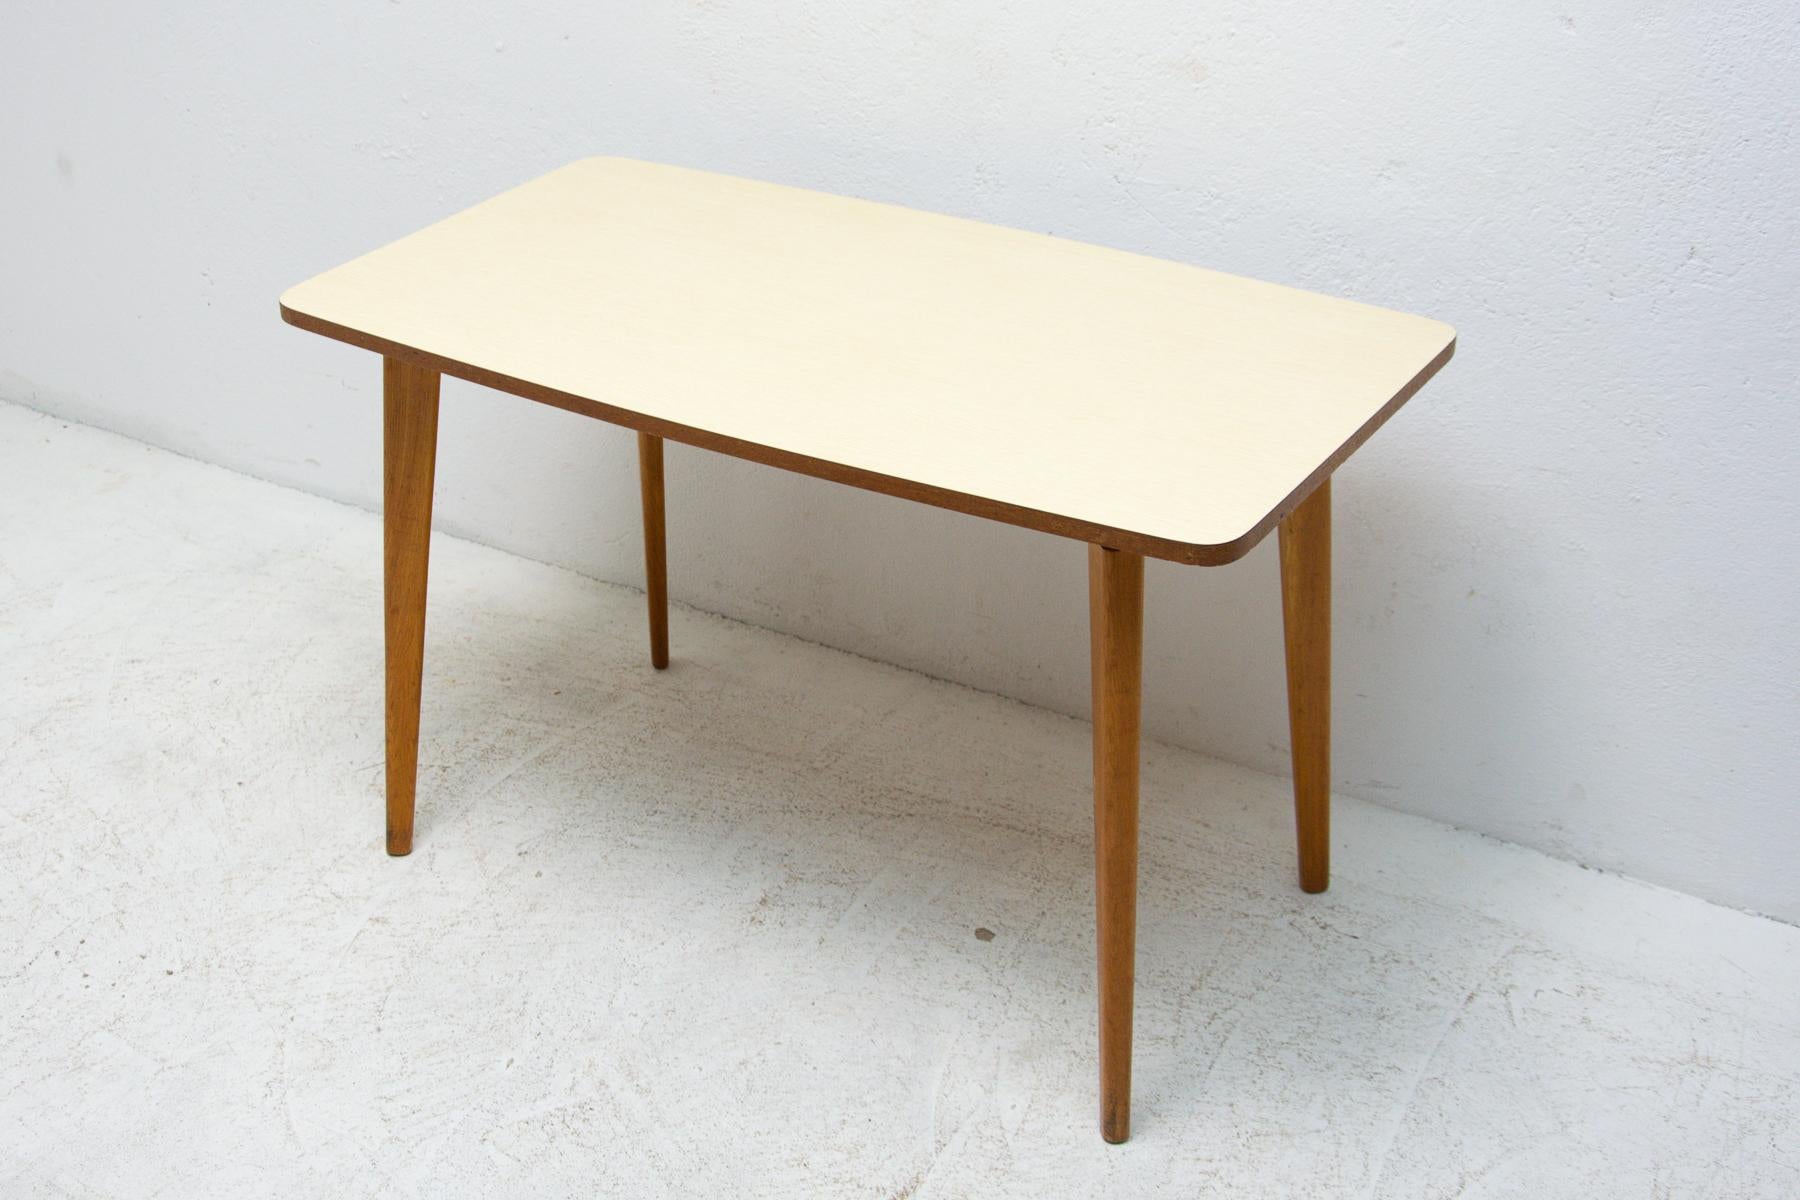 Mid Century coffee table with a formica plate, it was made in the former Czechoslovakia in the 1960s. Very interesting shaping. In very good Vintage condition, just bears minor signs of age and use.
     